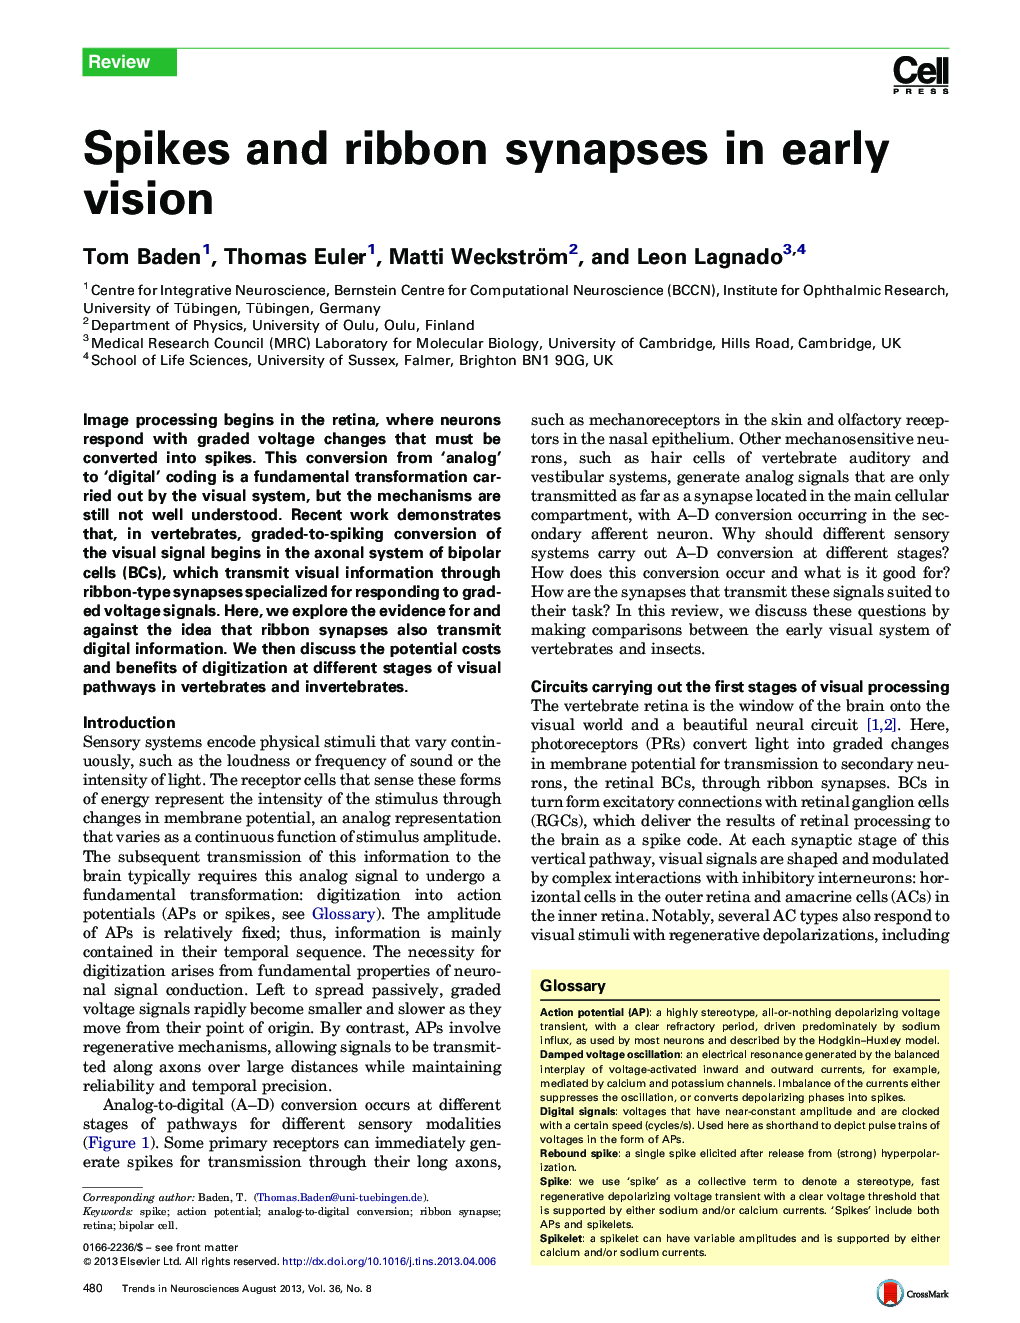 Spikes and ribbon synapses in early vision